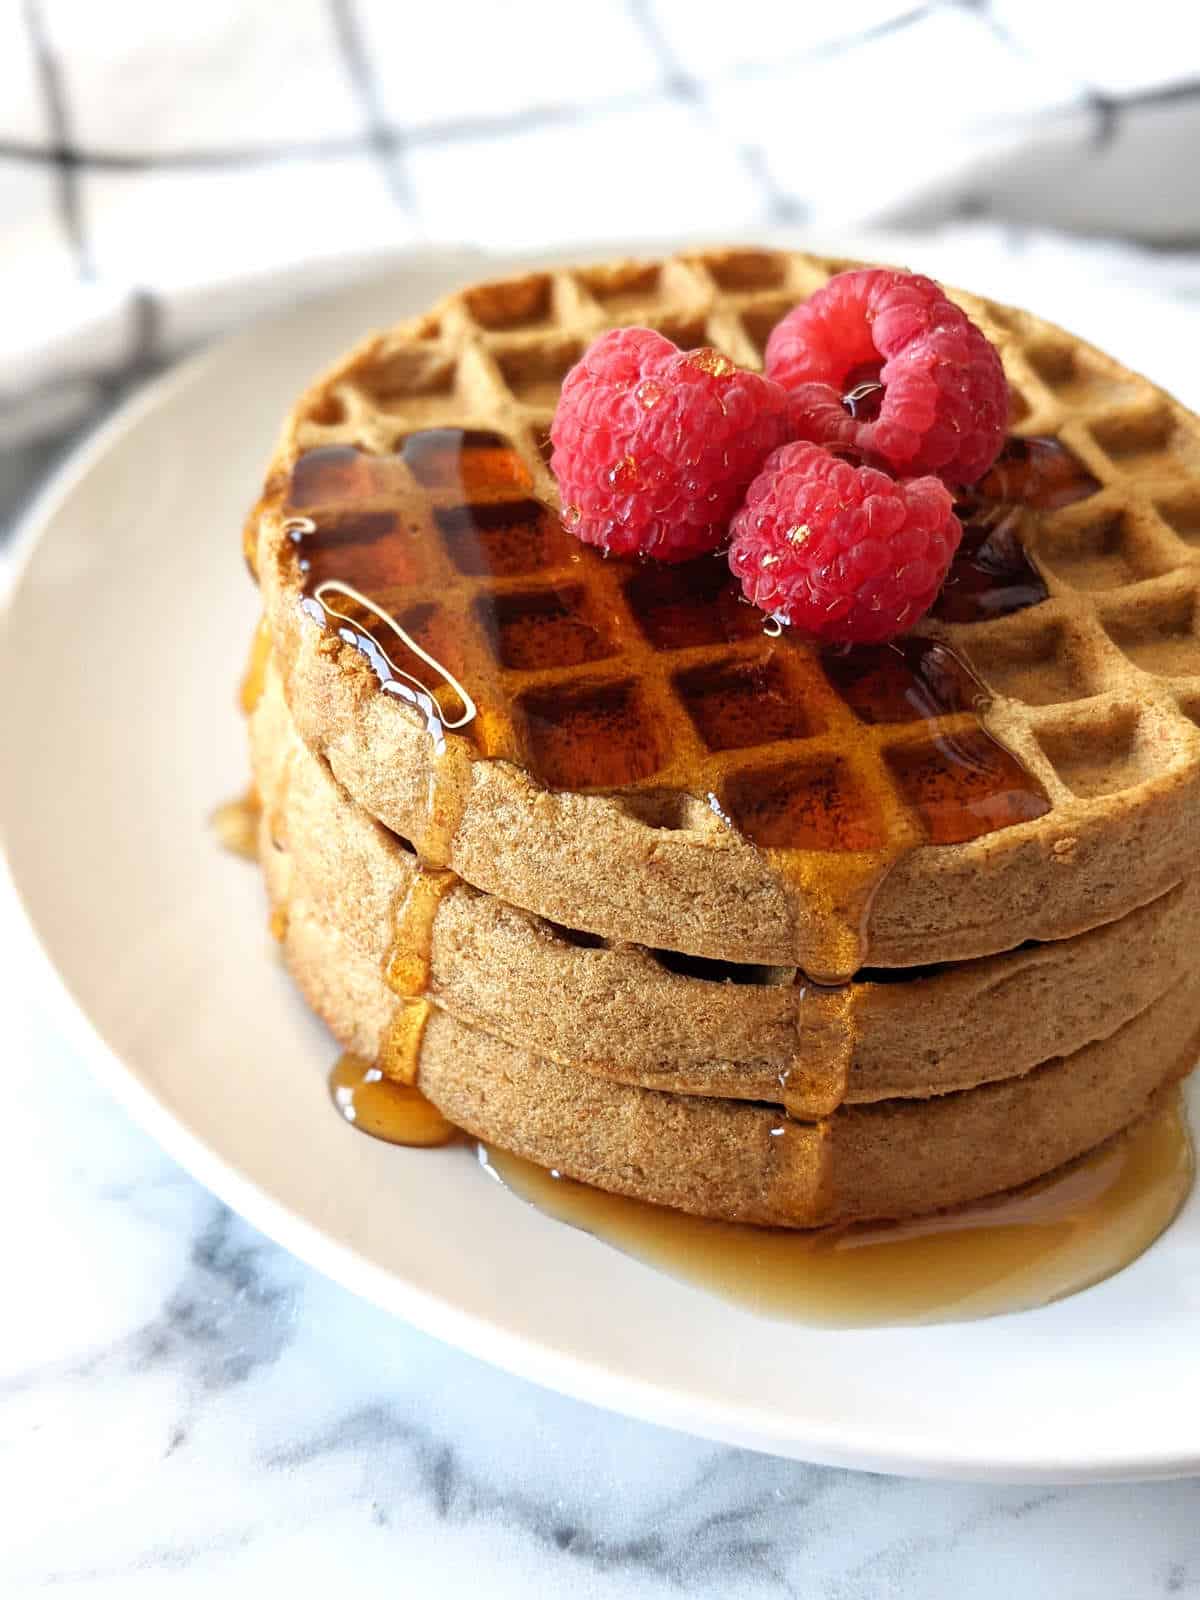 Air fried frozen waffles stacked on a plate topped with raspberries and maple syrup.